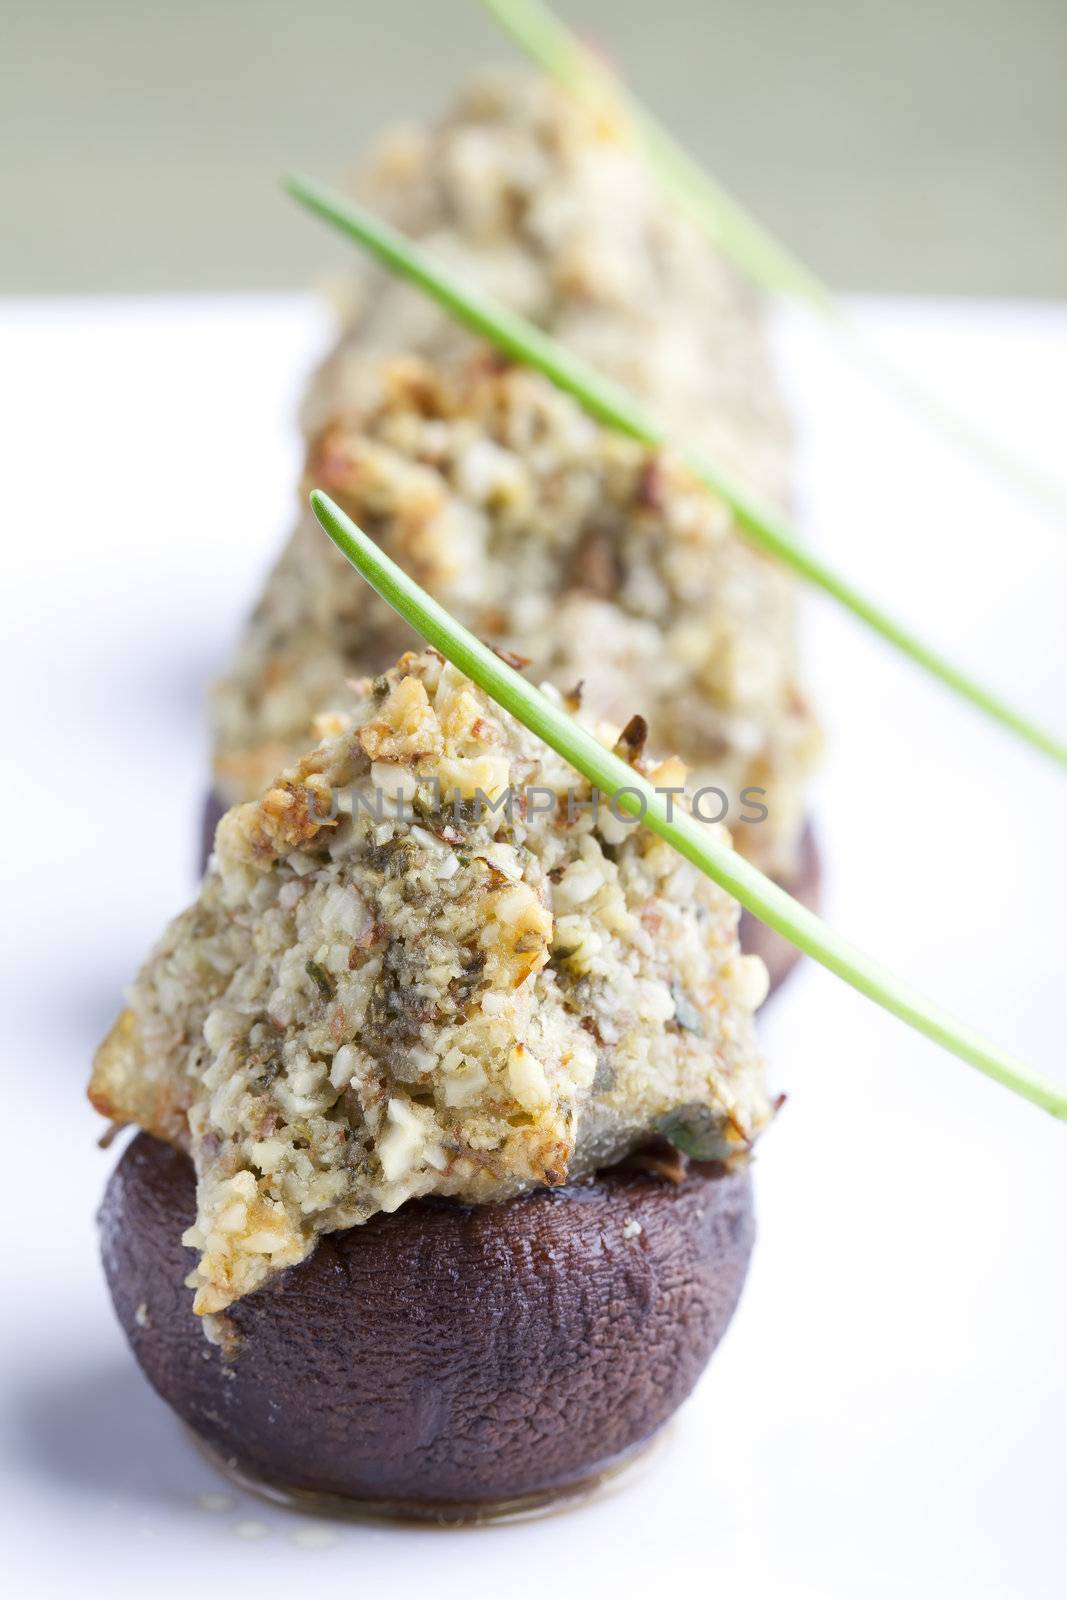 Button mushrooms stuffed with chopped nuts herbs and spices topped with a chive.